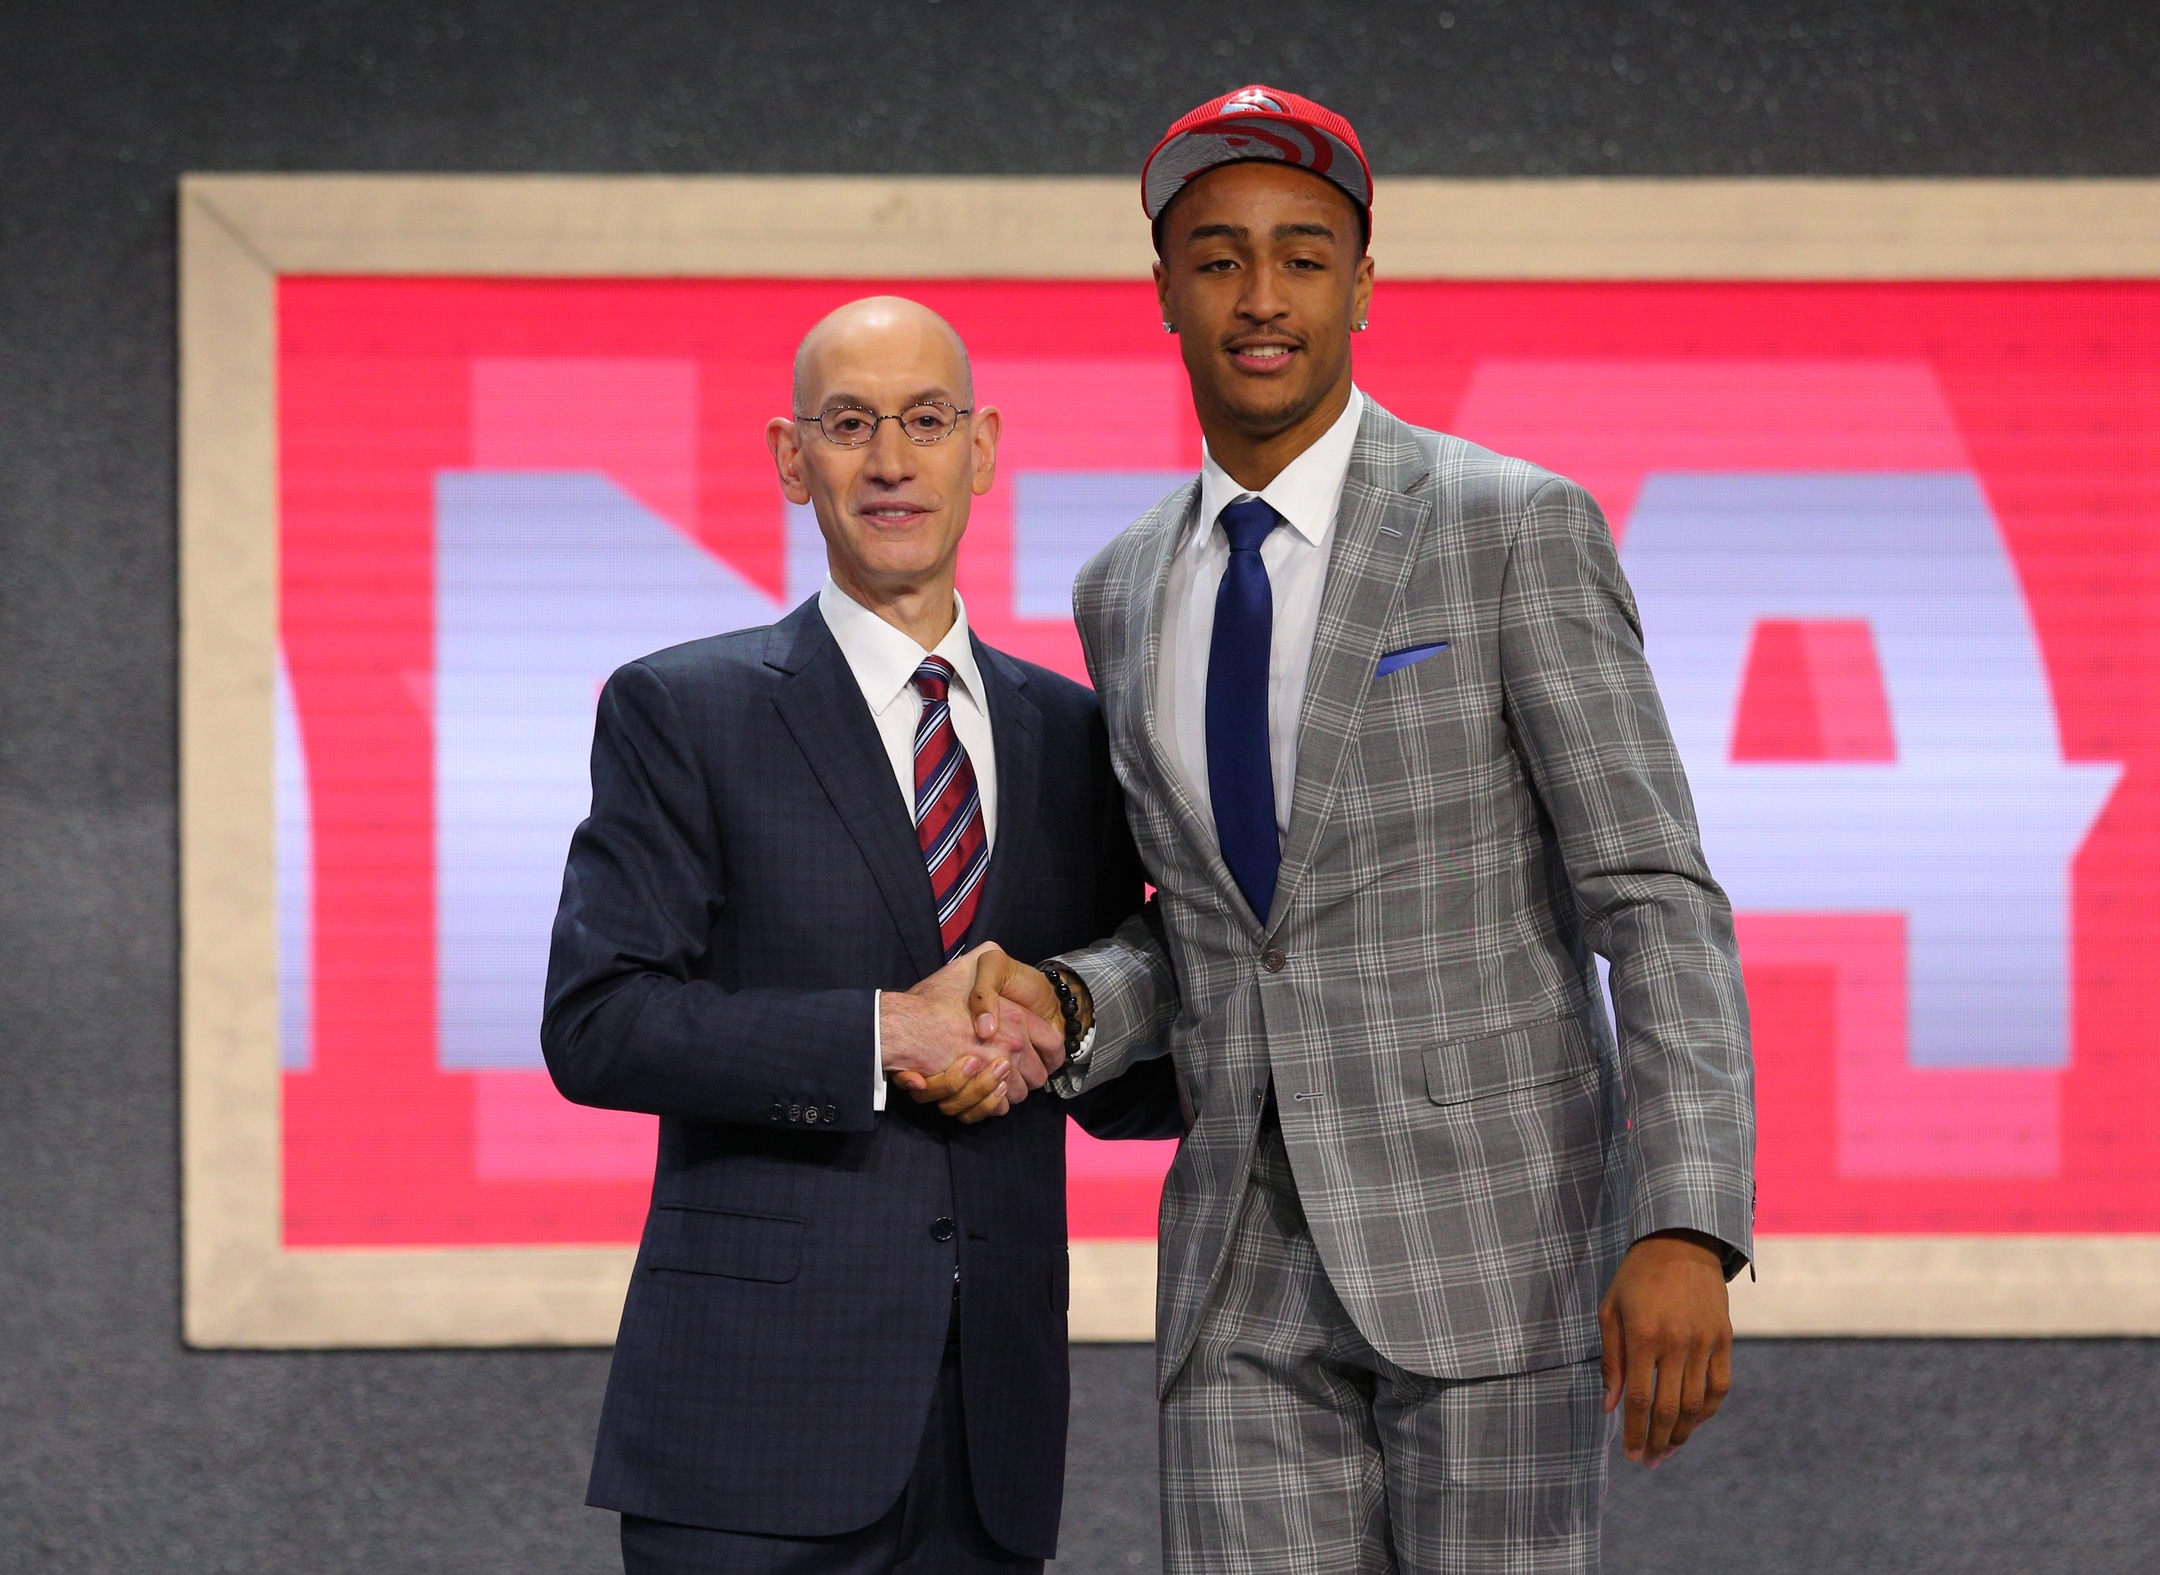 Hawks Draft Wake Forest's Collins At No. 19 In NBA Draft